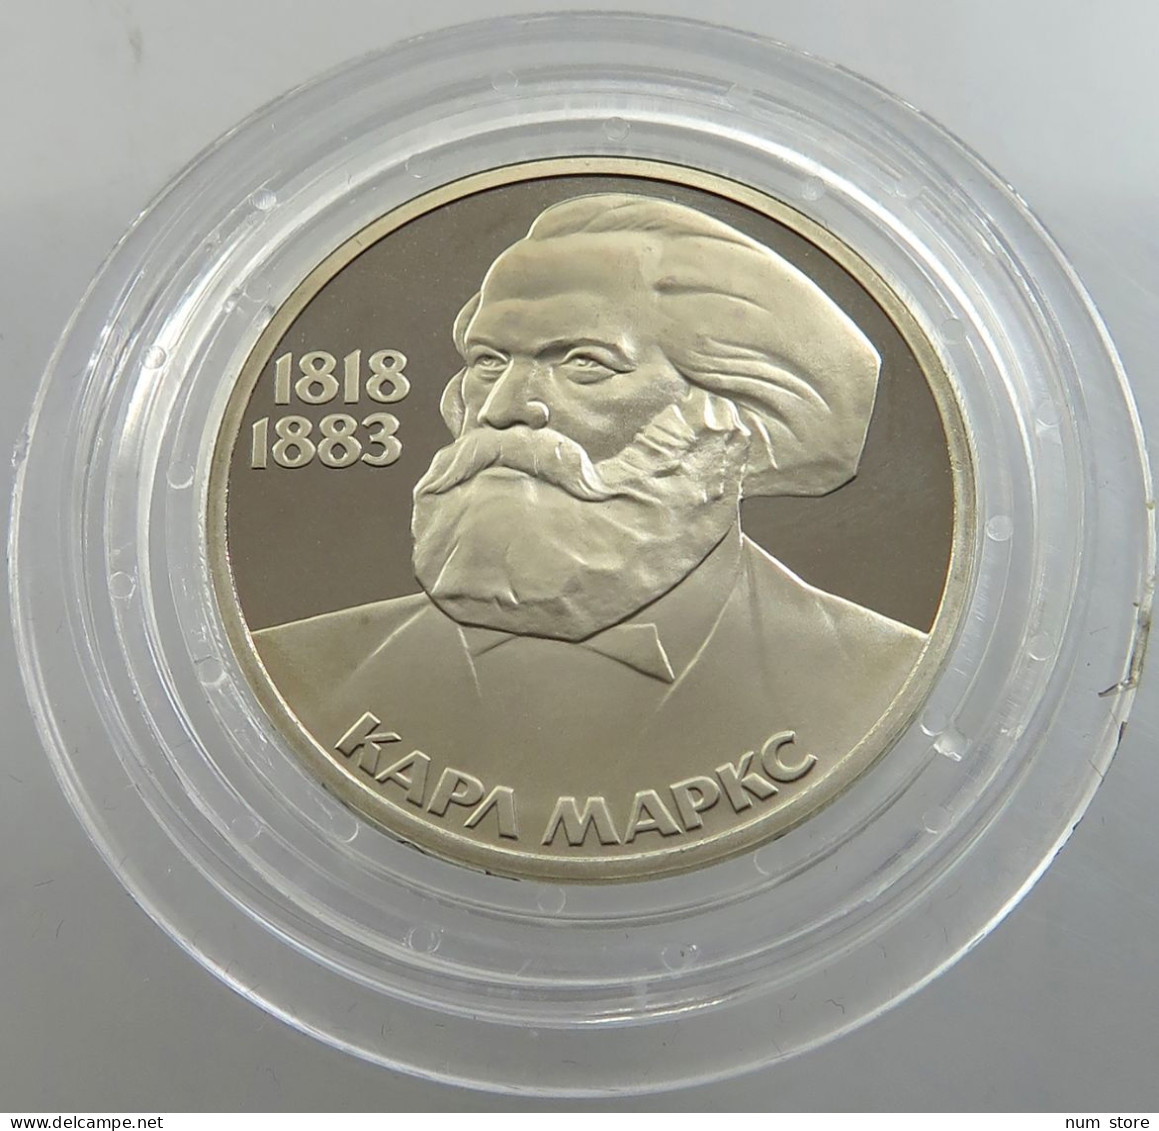 RUSSIA USSR 1 ROUBLE 1983 1988 MARX PROOF #sm14 0333 - Russie